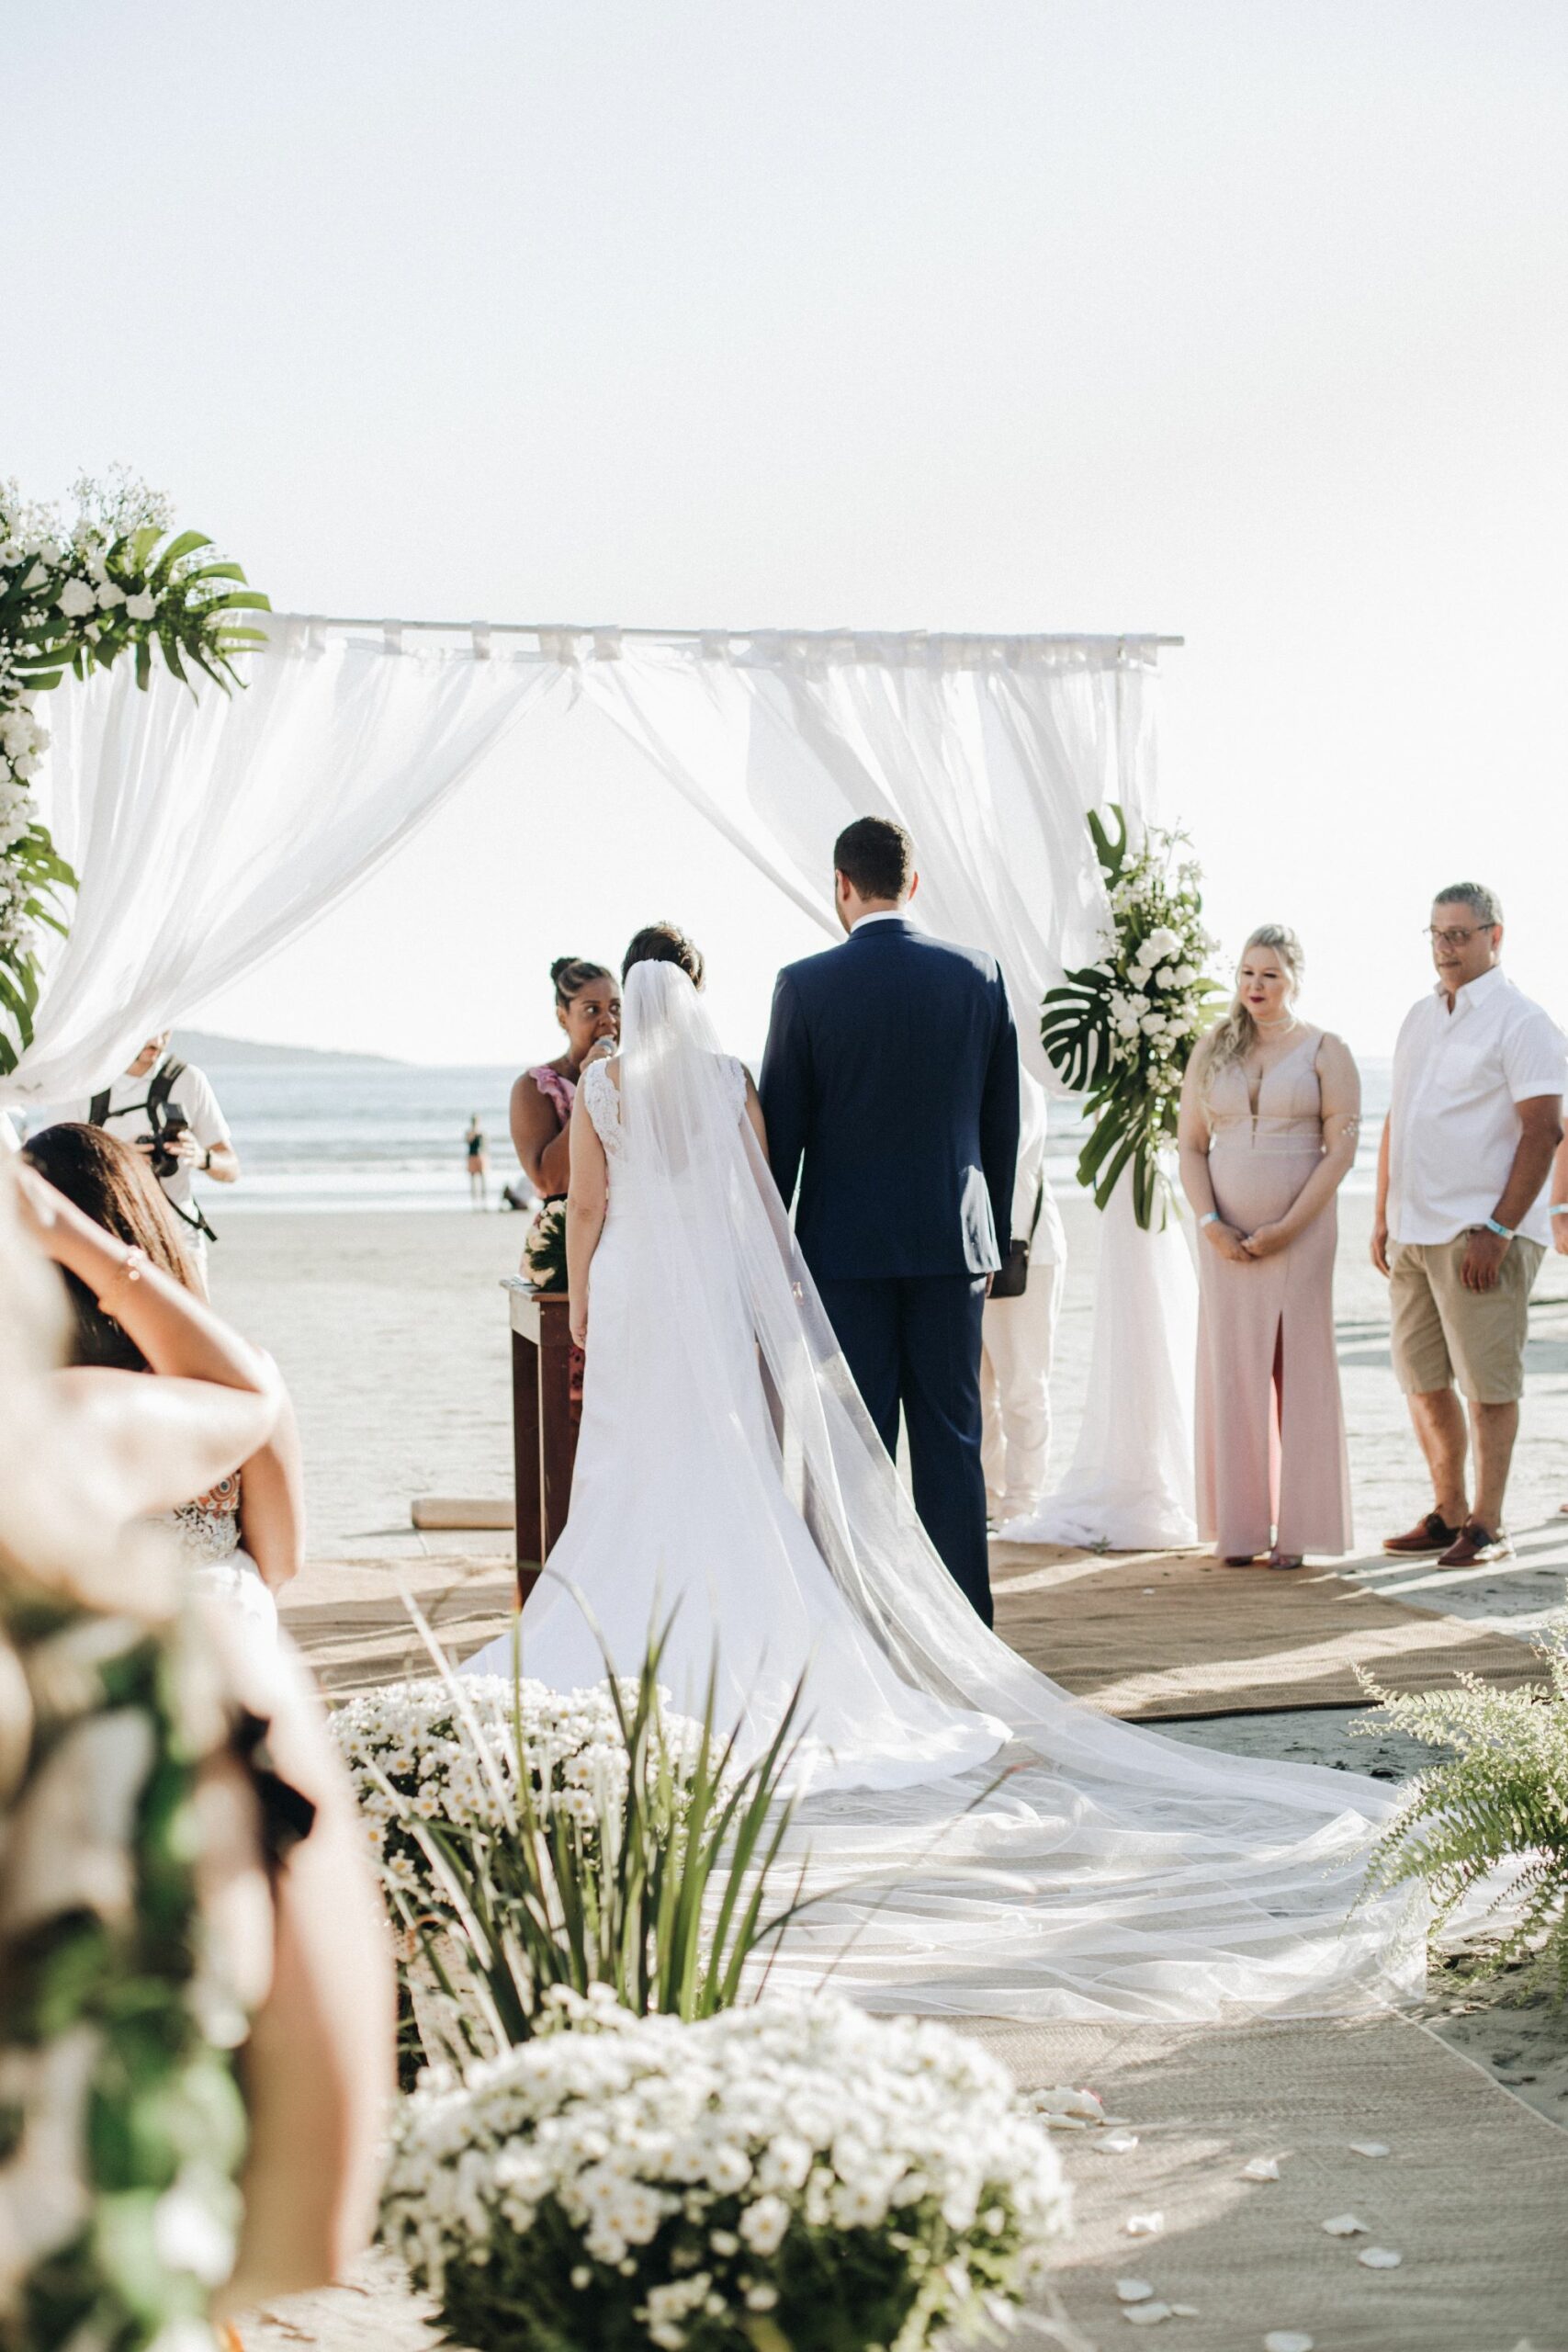 An image of a couple at their beach wedding.